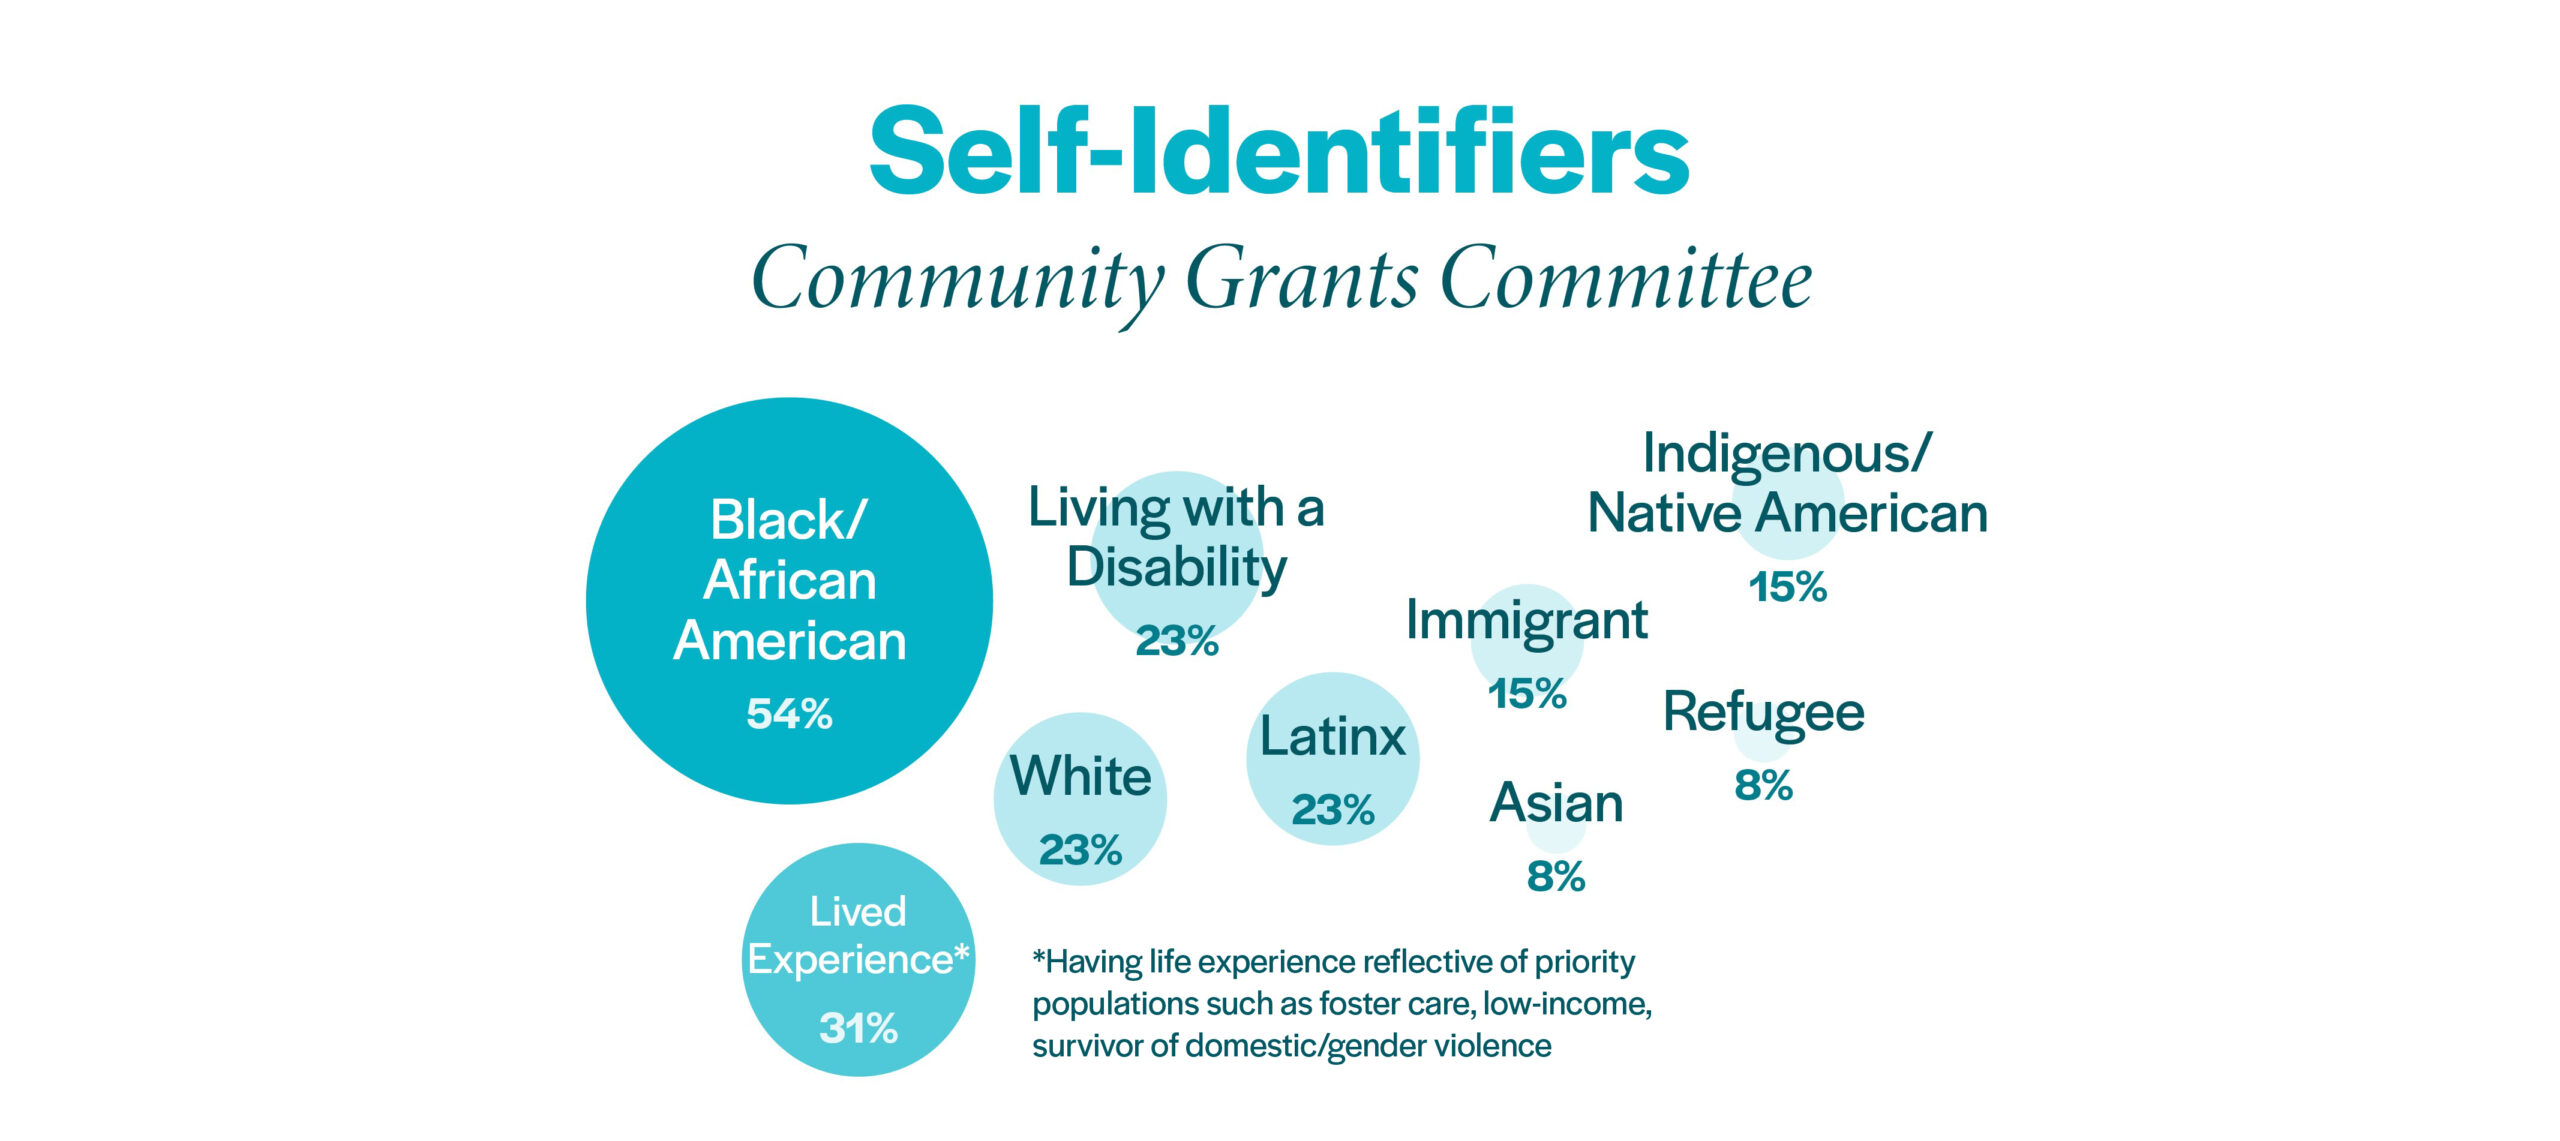 This is an infographic showing the Community Grants Committee's Self Identifiers. Members of the Committee self-identify as follows: African American/Black​, 54%​ Asian, 8%​ Caucasian/White​, 23%​ Immigrant​, 15%​ Latinx​, 23%​ Lived experience reflecting priority population, such as foster youth, low-income, survivor of domestic violence/gender violence or previously unhoused, 31%​ Living with a disability​, 23%​ Indigenous/Native American​, 15%​ Refugee​, 8%​